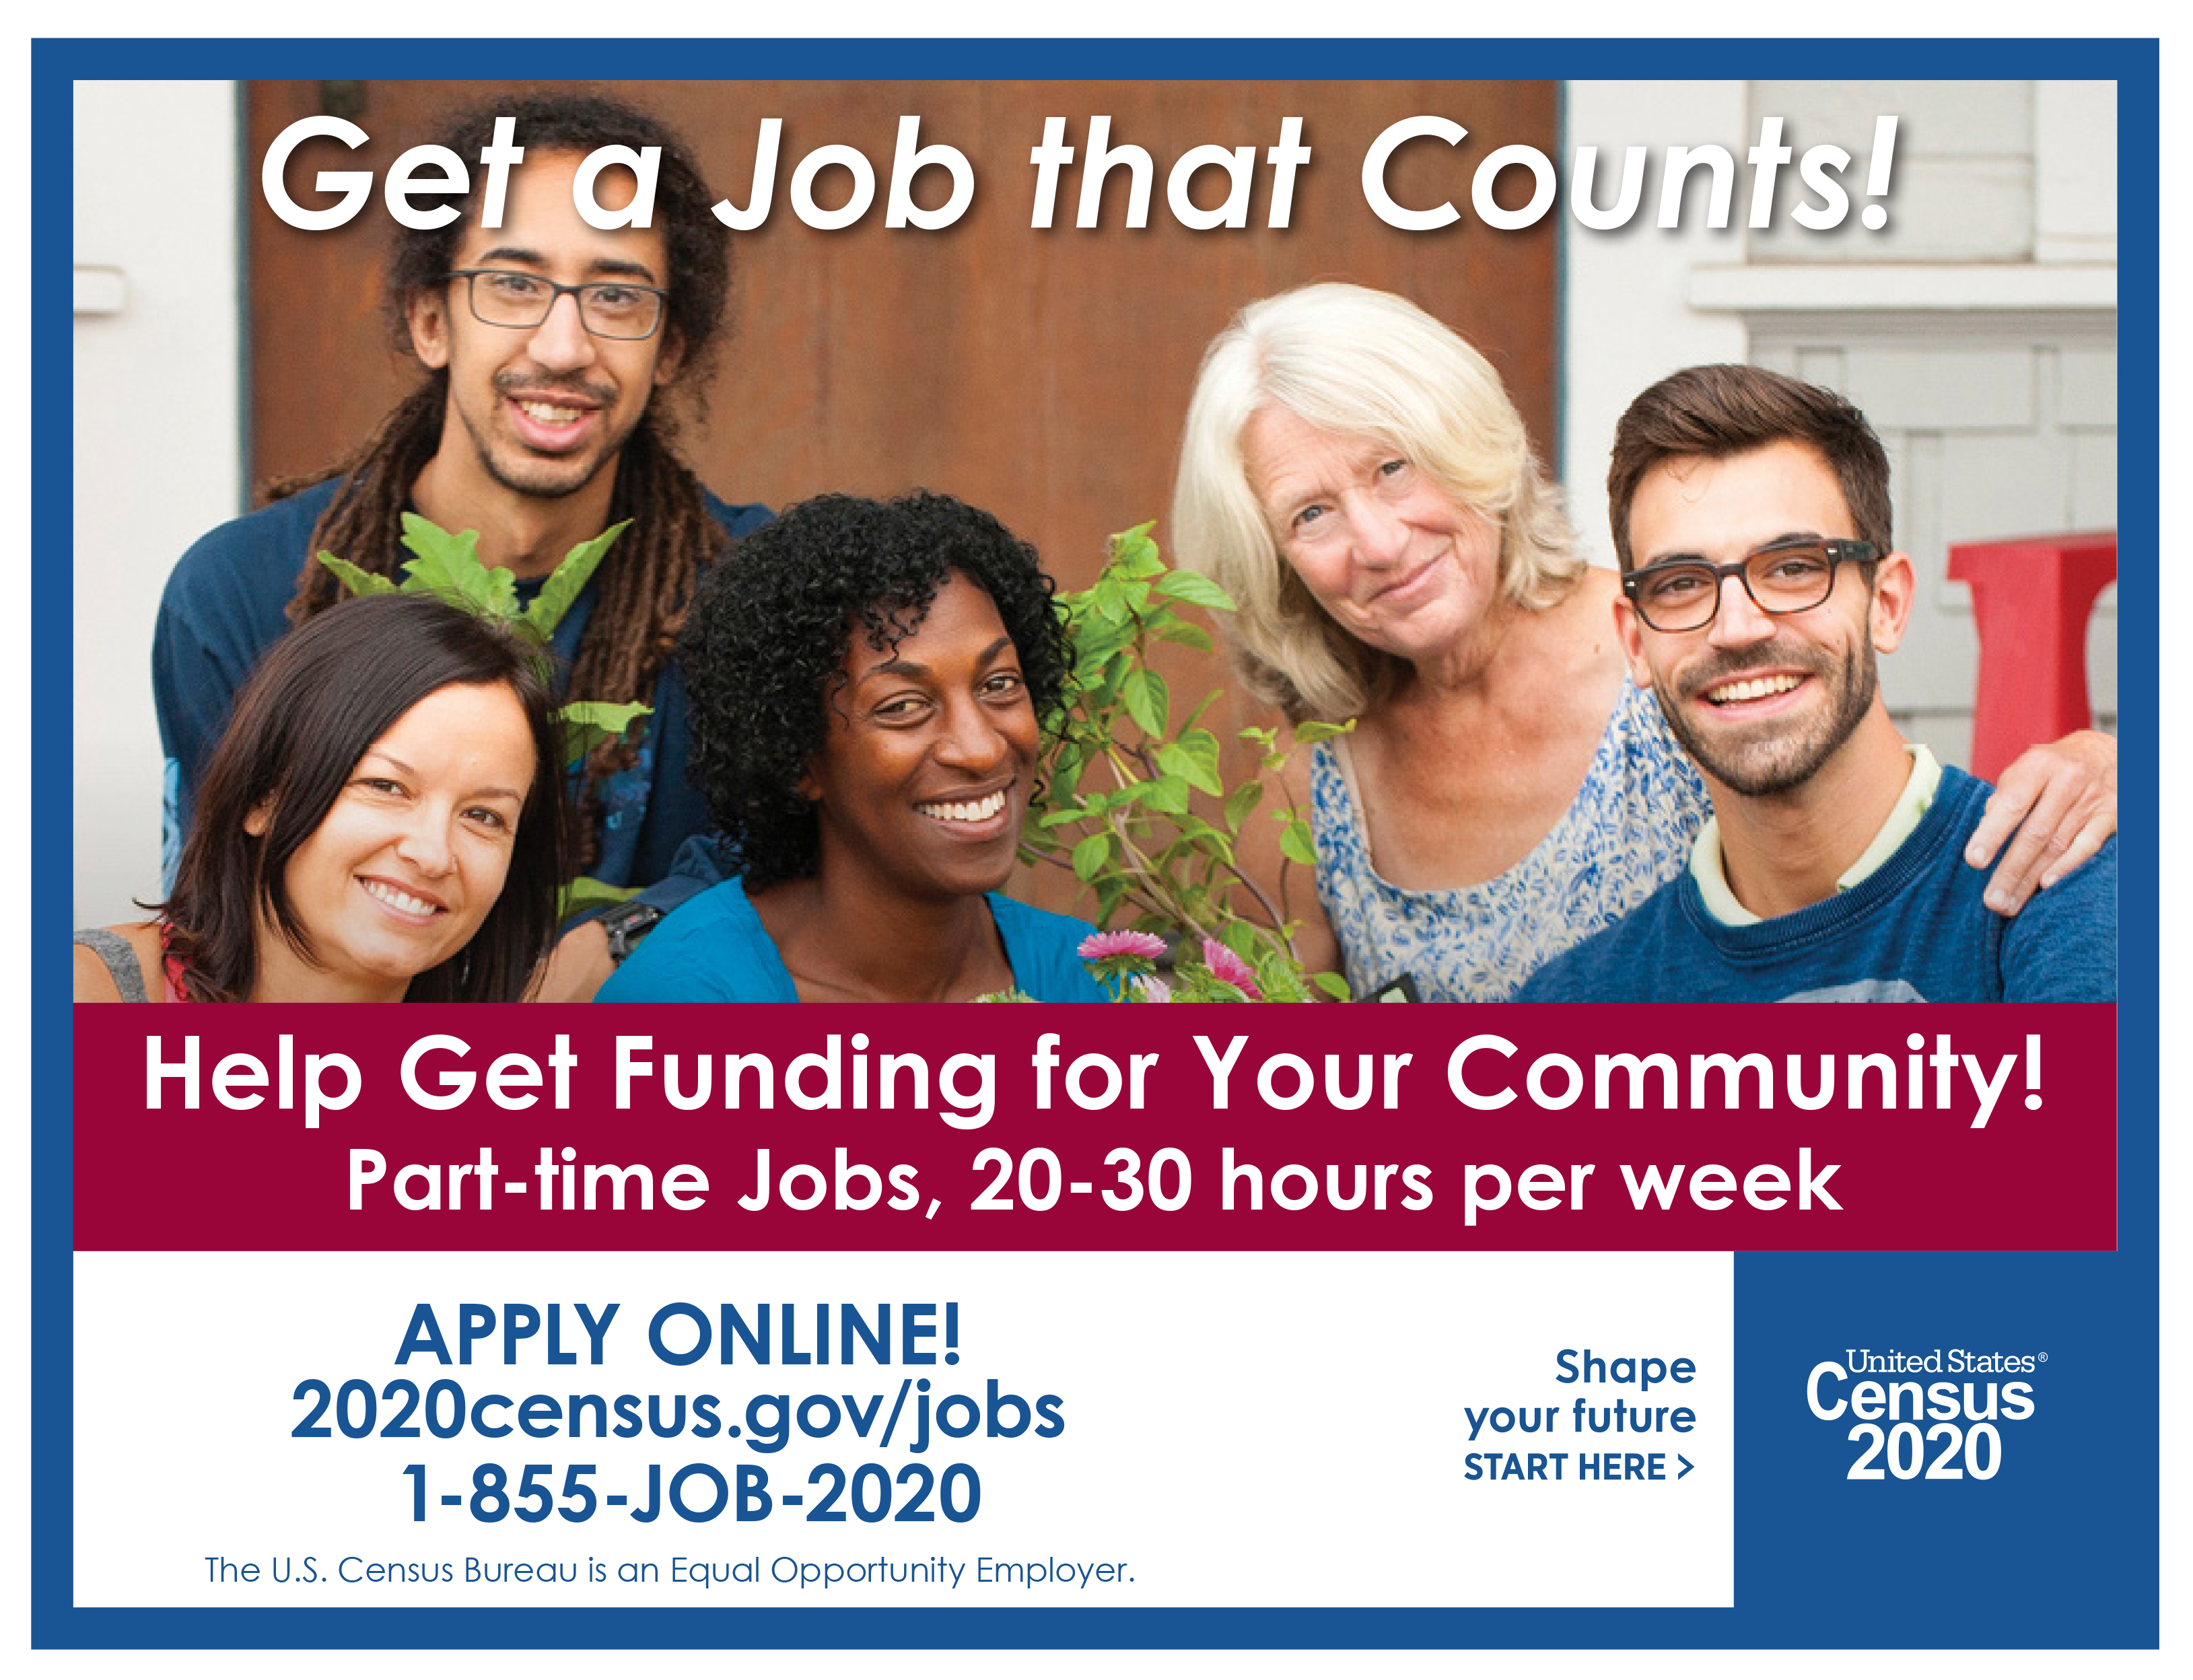 Get a job that counts! Help get funding for your community! Part-time jobs, 20-30 hours per week. Apply Online! 2020census.gov/jobs OR call 1-855-JOB-2020